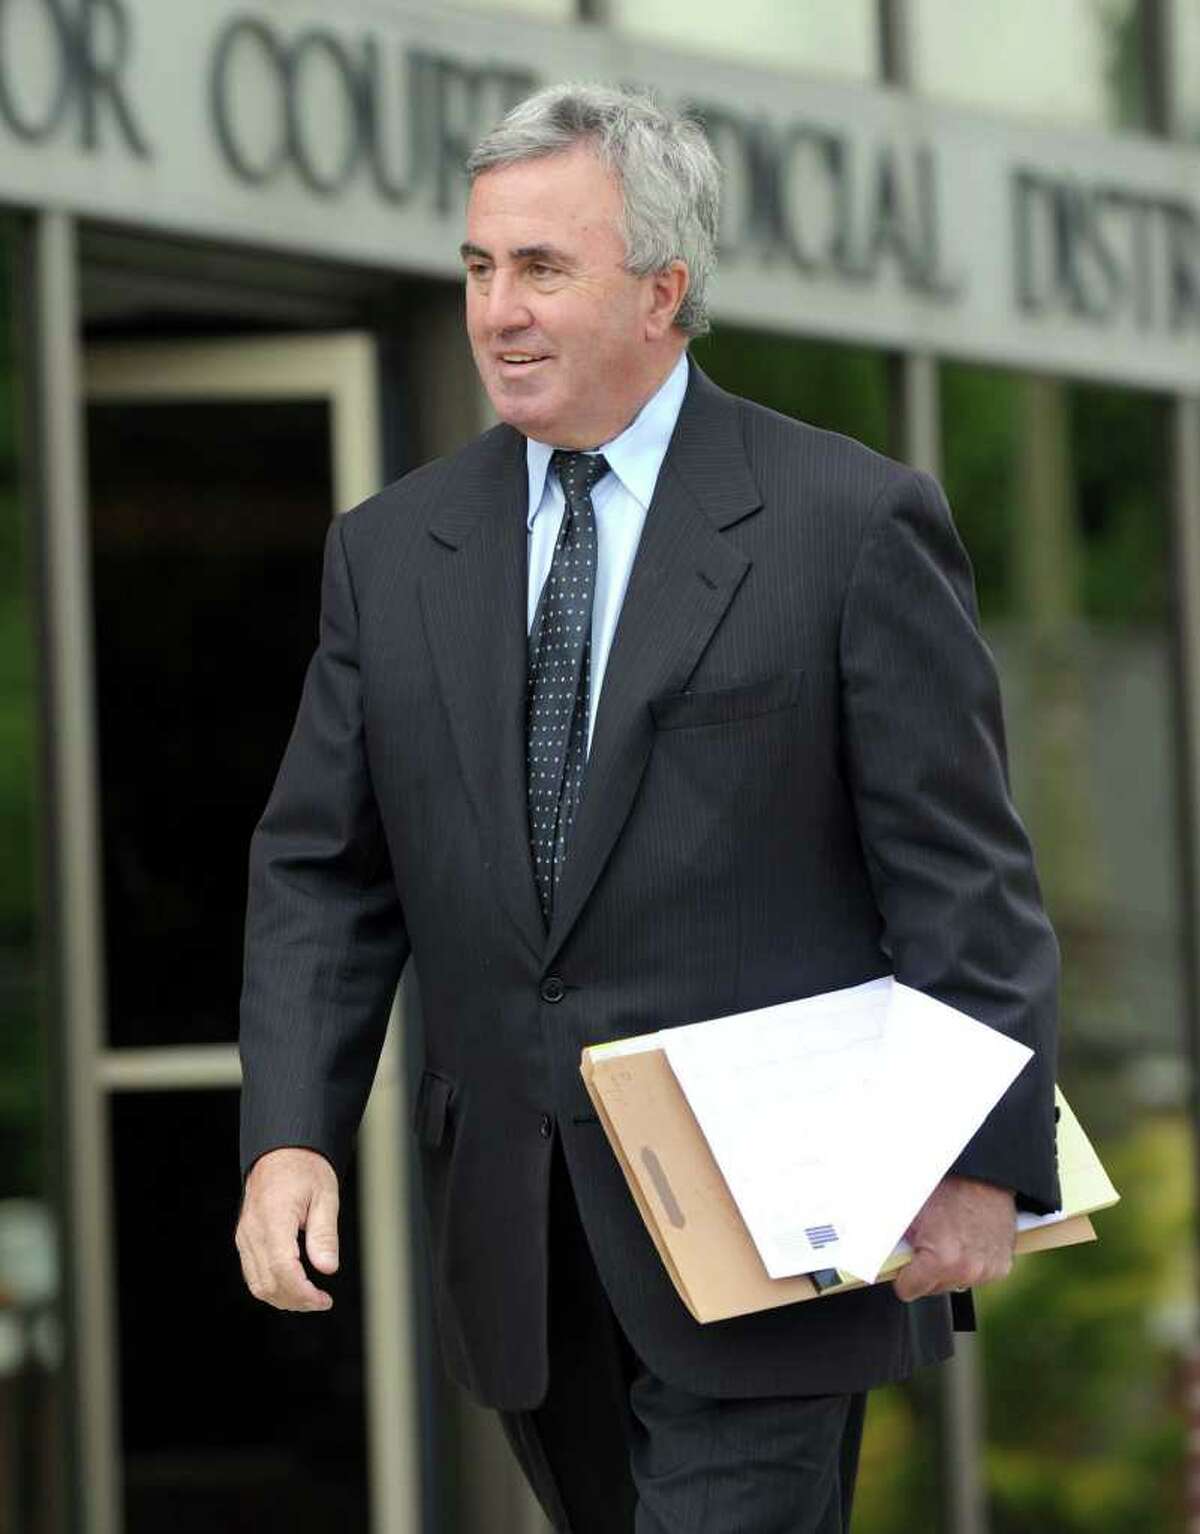 Michael “Mickey” Sherman, a Greenwich-based criminal defense lawyer leaves Danbury Superior Courtin on June 11, 2010. Sherman faces up to two years in prison as a result of his guilty pleas last summer to two misdemeanor charges of failing to pay $420,710 in owed income taxes for the years 2001 and 2002. He already repaid the taxes owed.